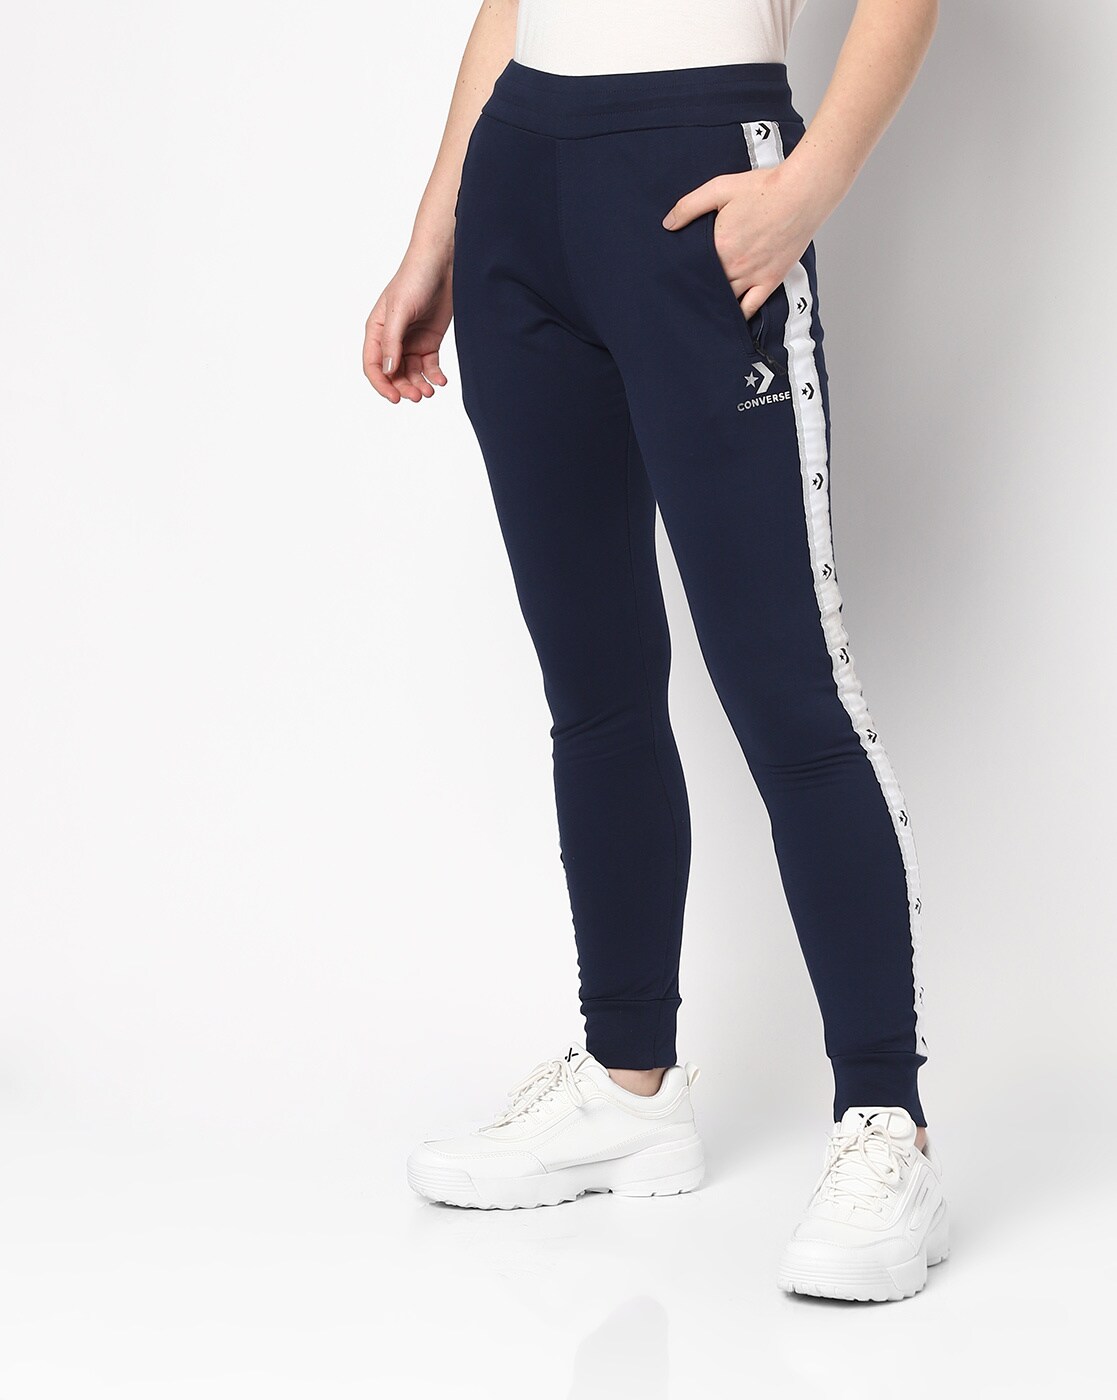 Buy Blue Track Pants for Girls by Converse Online  Ajiocom